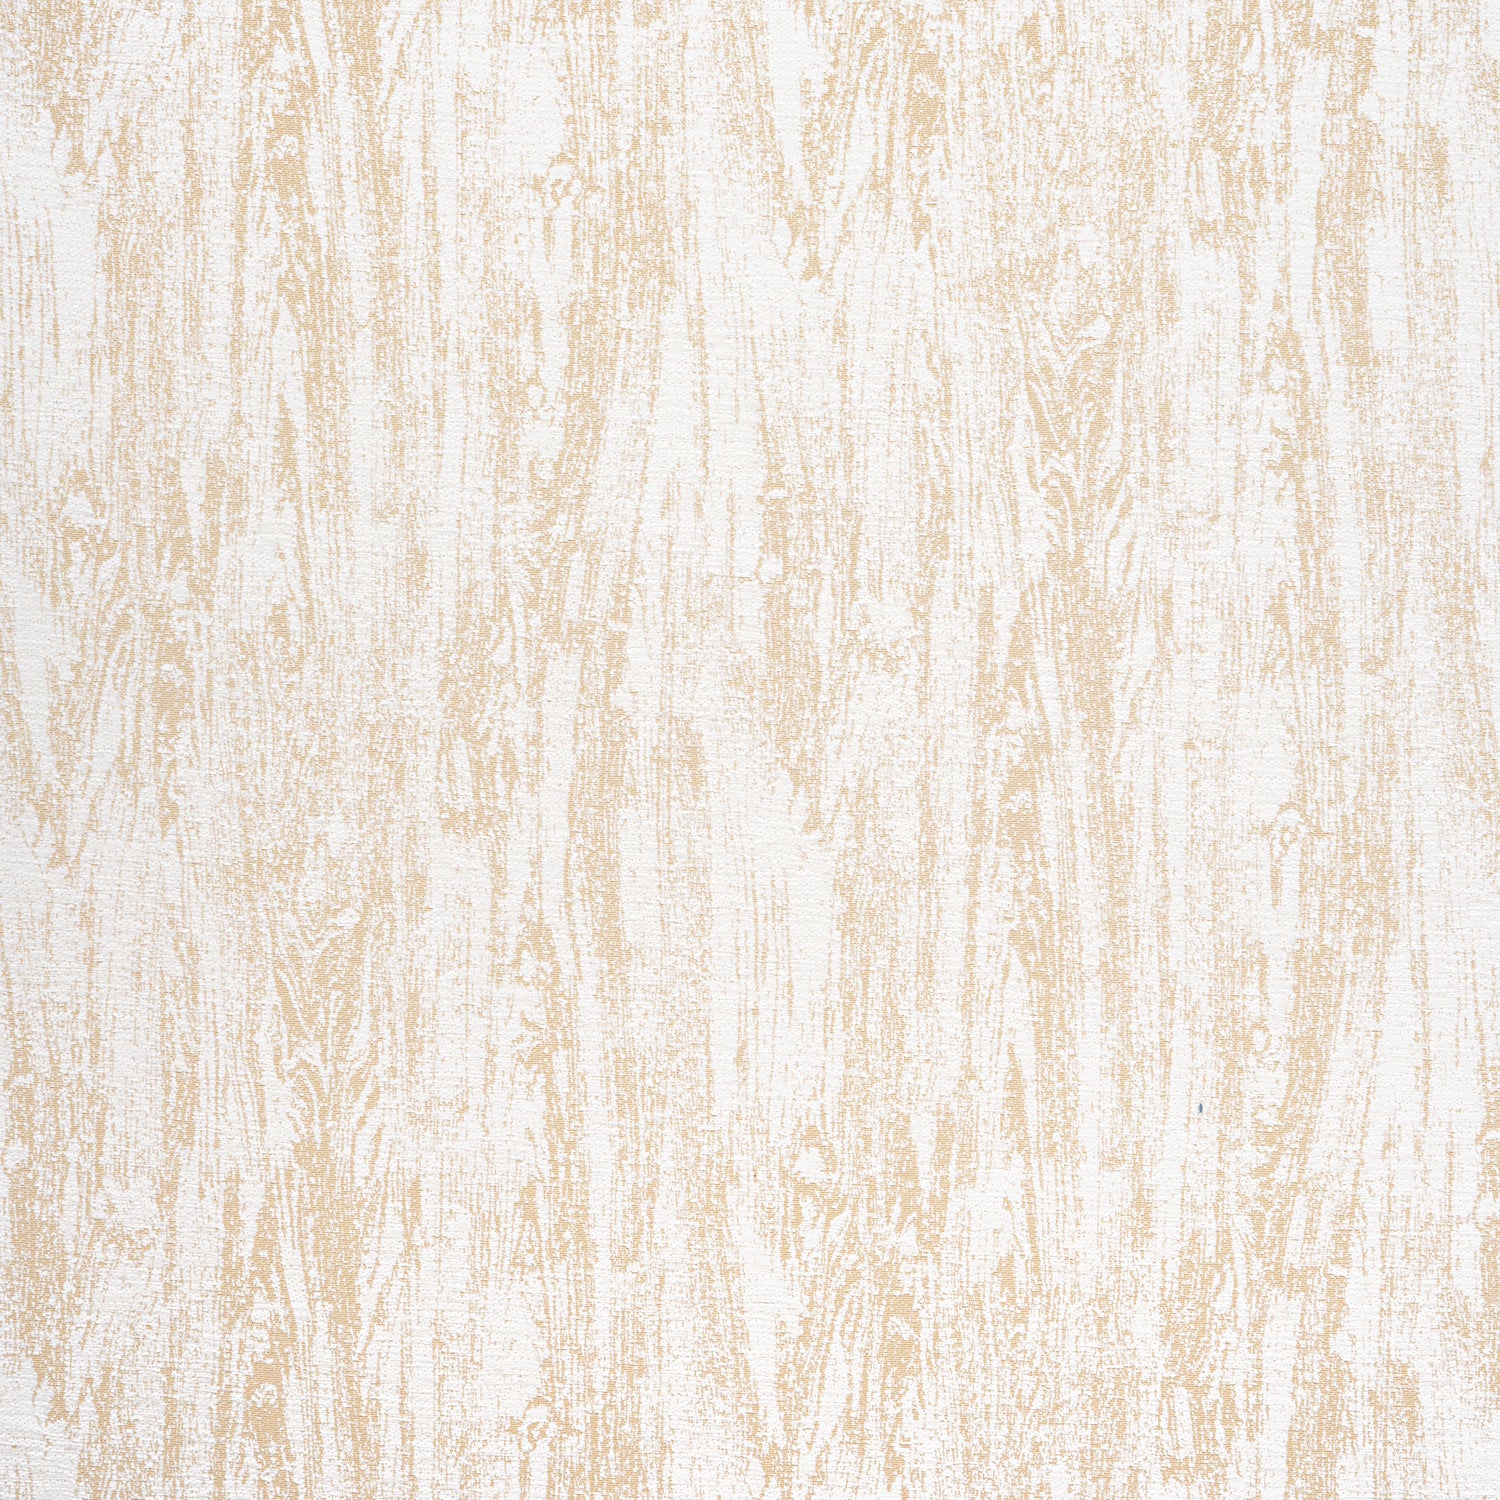 Pine Grove fabric in oak color - pattern number W78326 - by Thibaut in the  Sierra collection